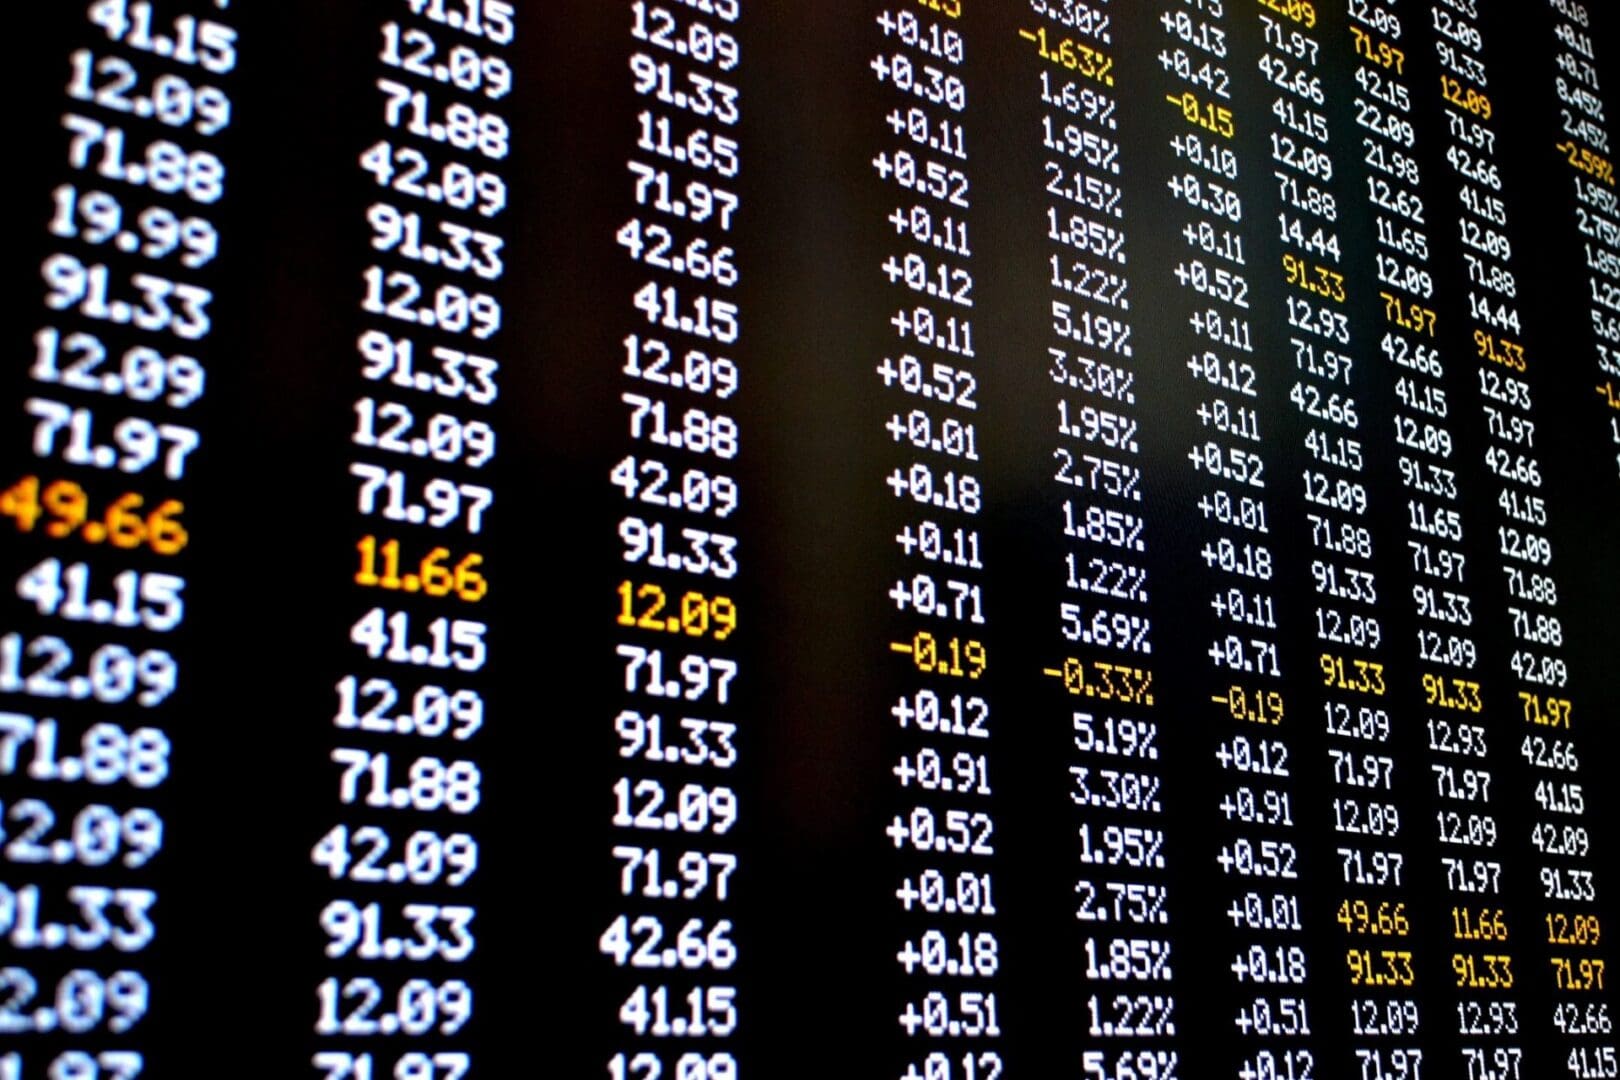 Stock market data displayed on an electronic board with various numbers indicating stock prices and changes.